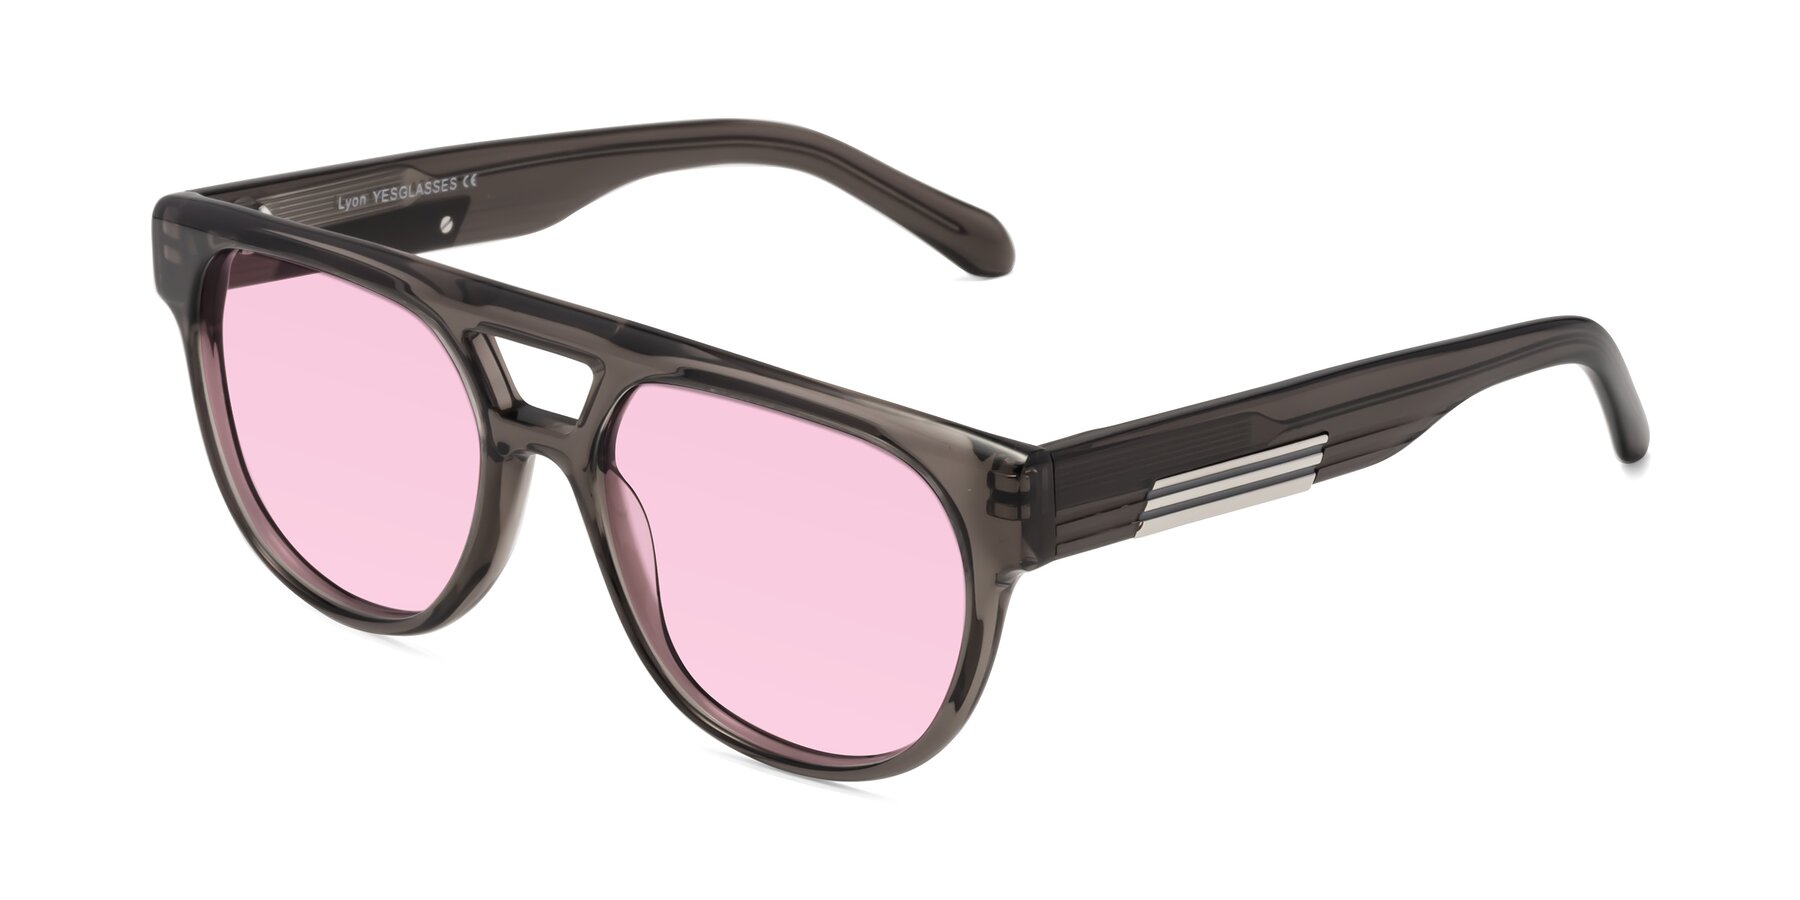 Angle of Lyon in Charcoal Gray with Light Pink Tinted Lenses